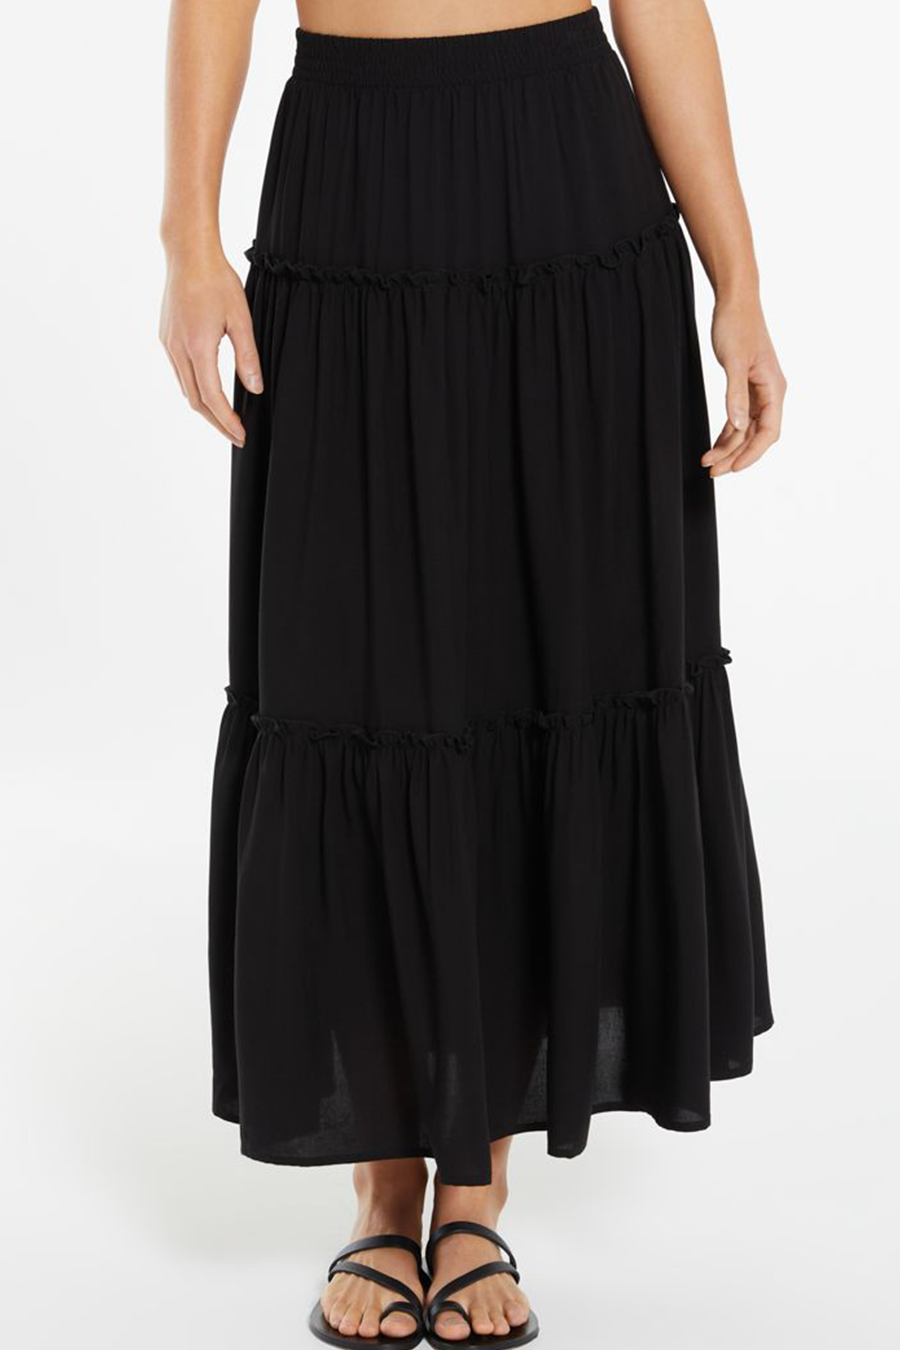 High Noon Maxi Skirt | Black - Main Image Number 1 of 1